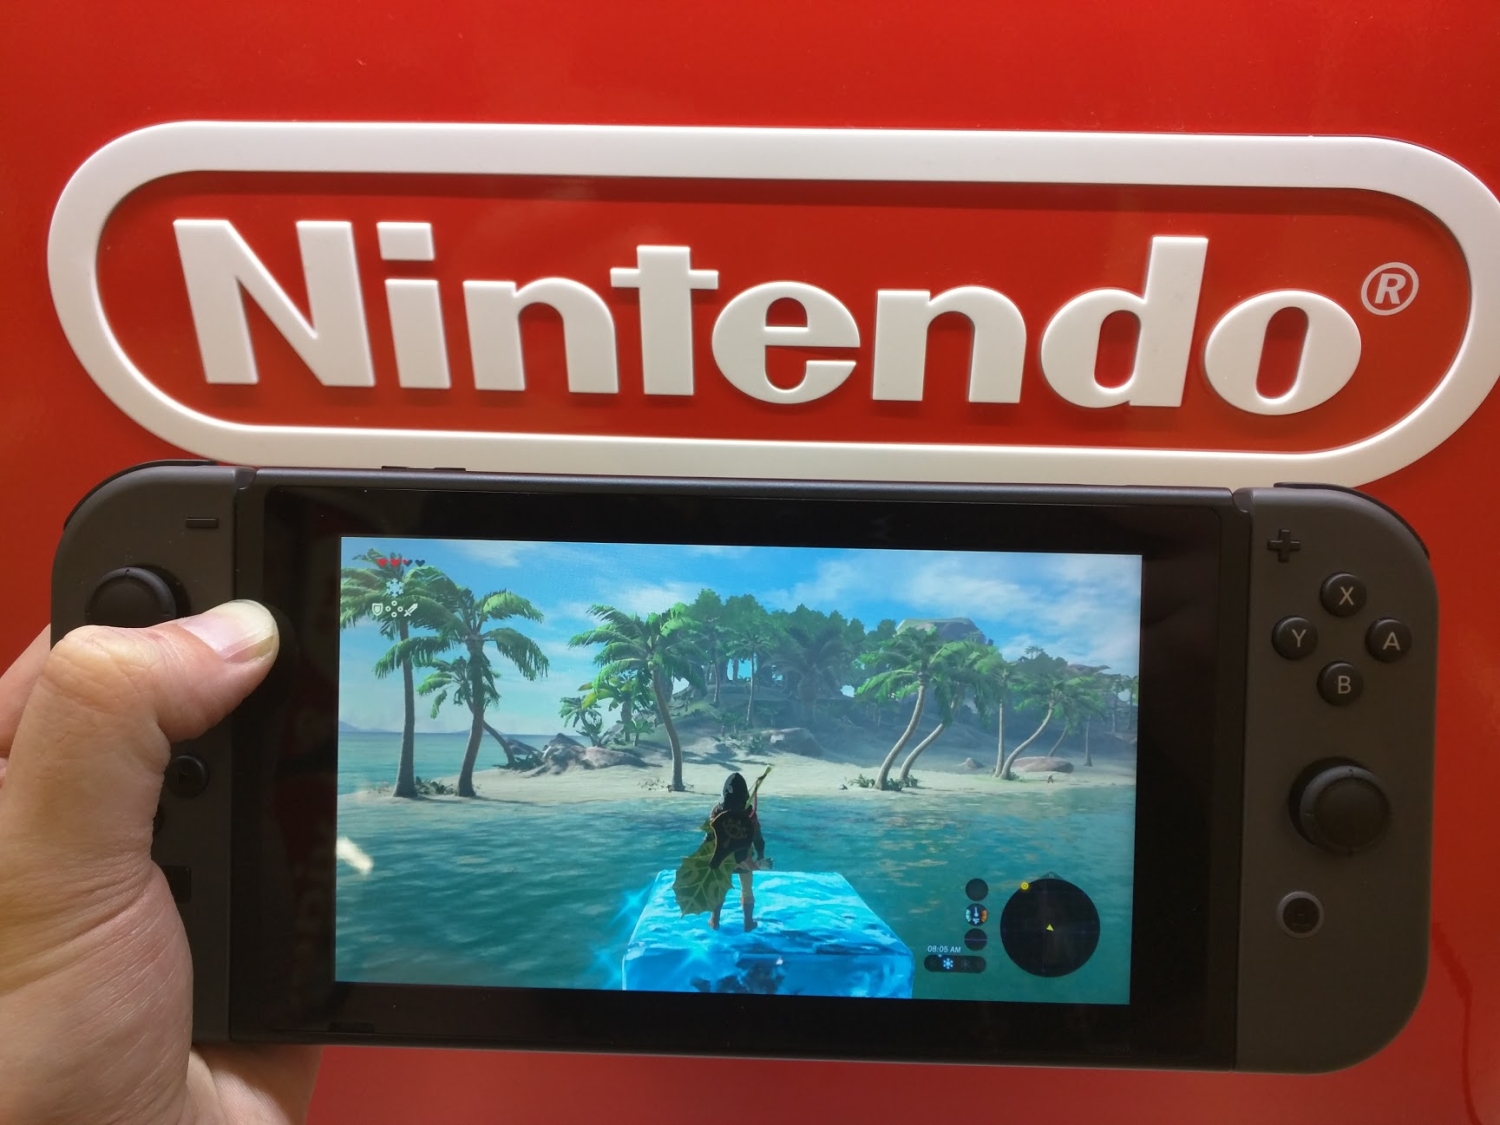 Nintendo Switch now the third best-selling console of all time